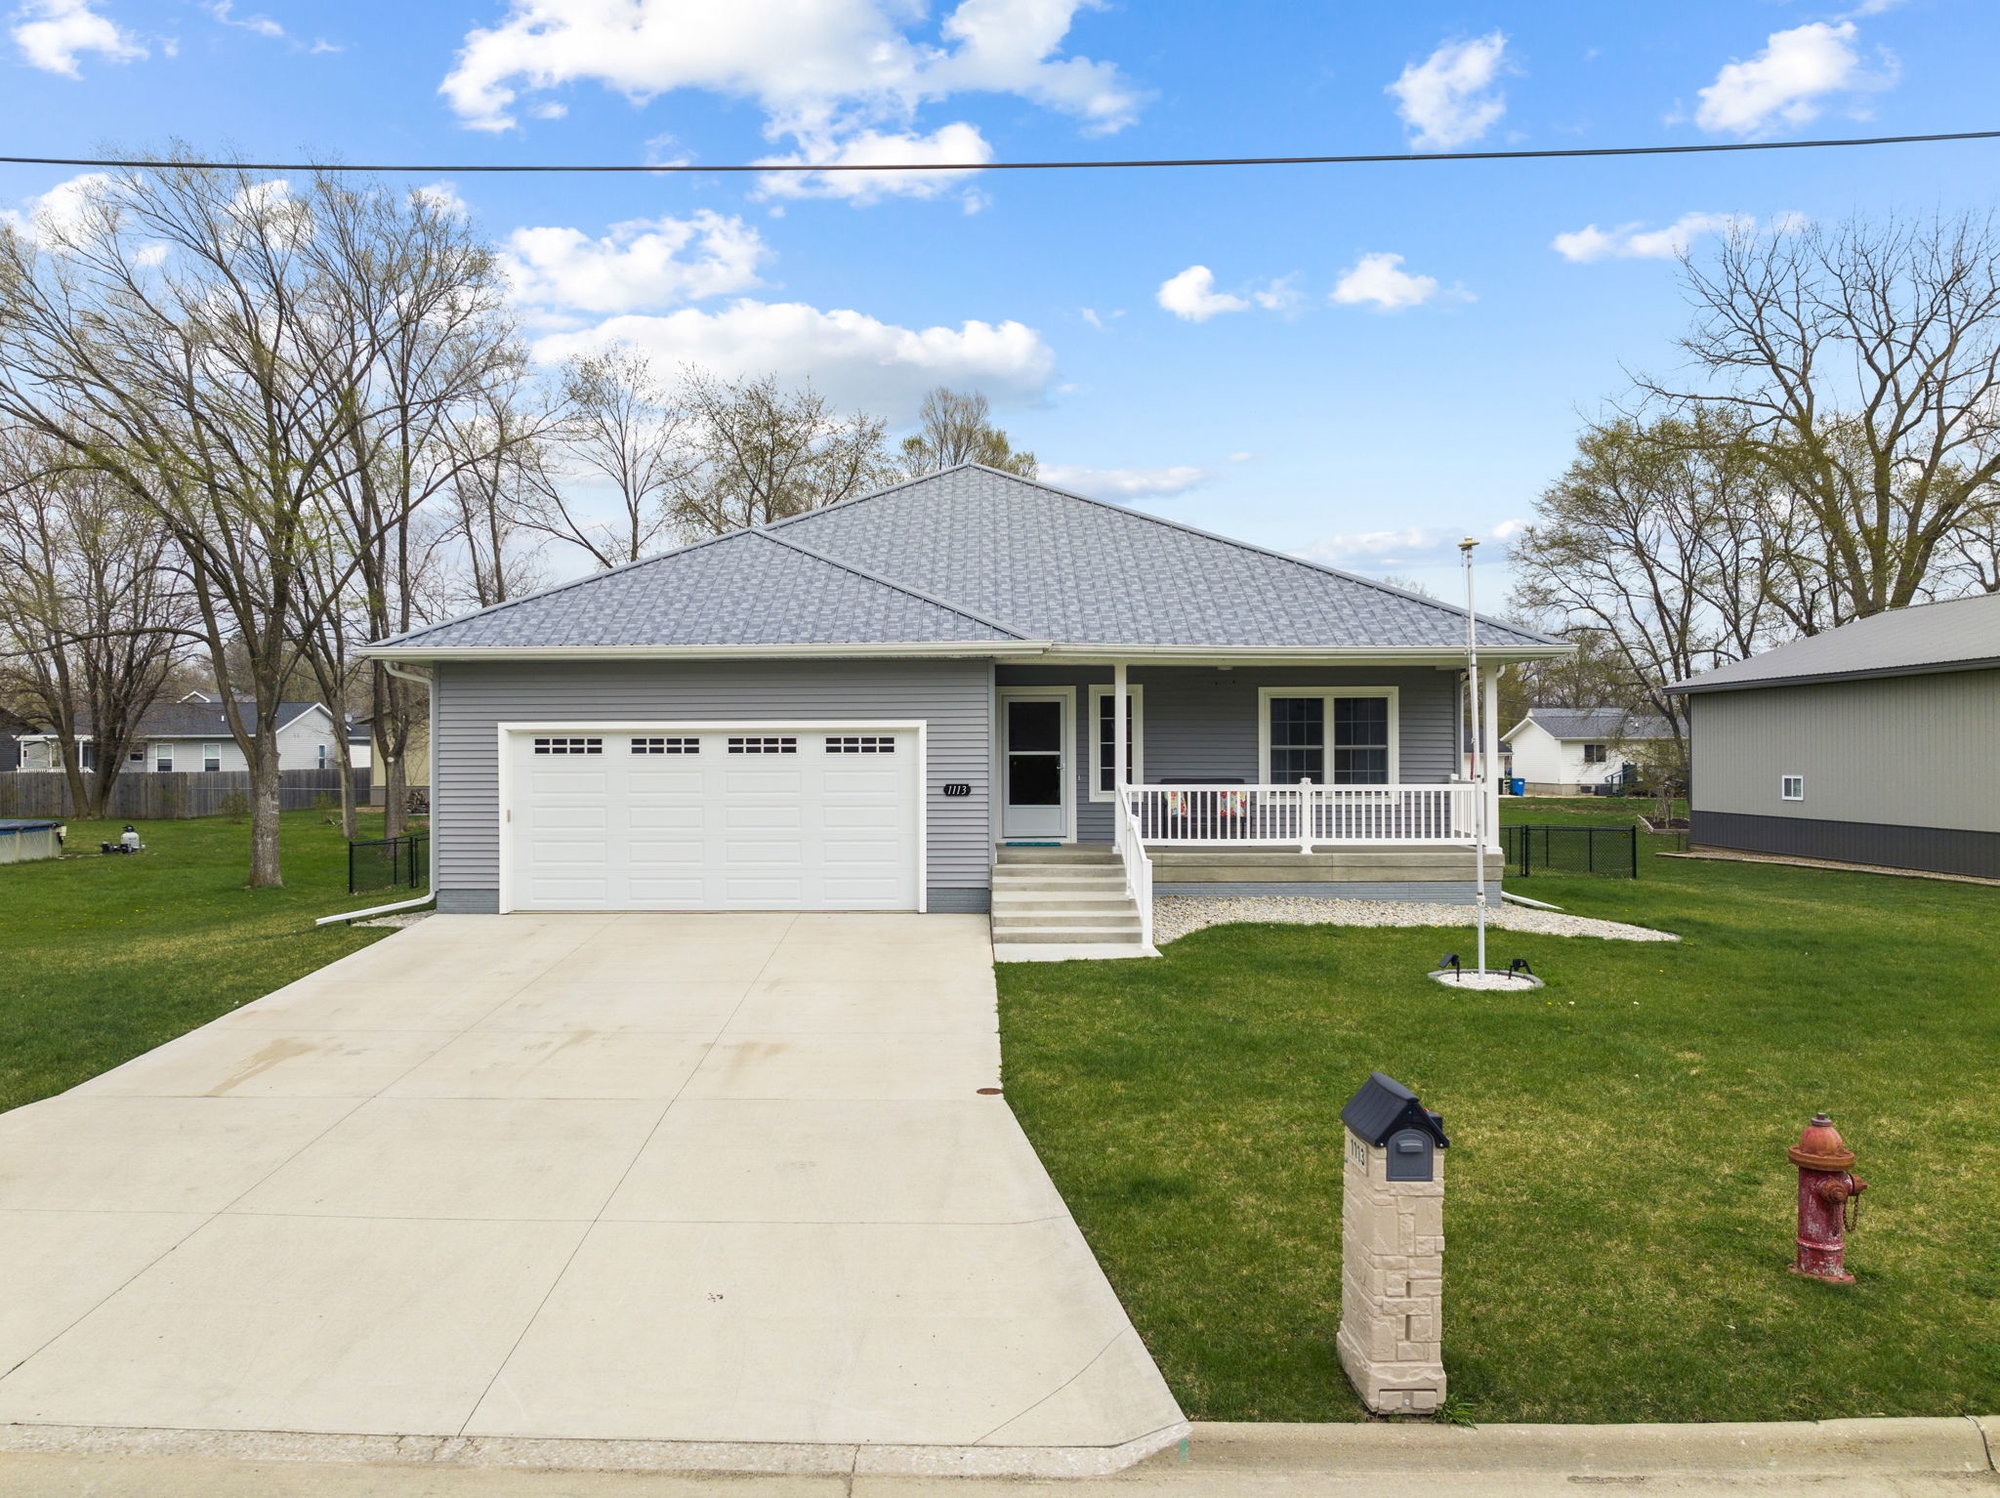 The Newly- Built Home in Evansdale Iowa that is Sure to Impress